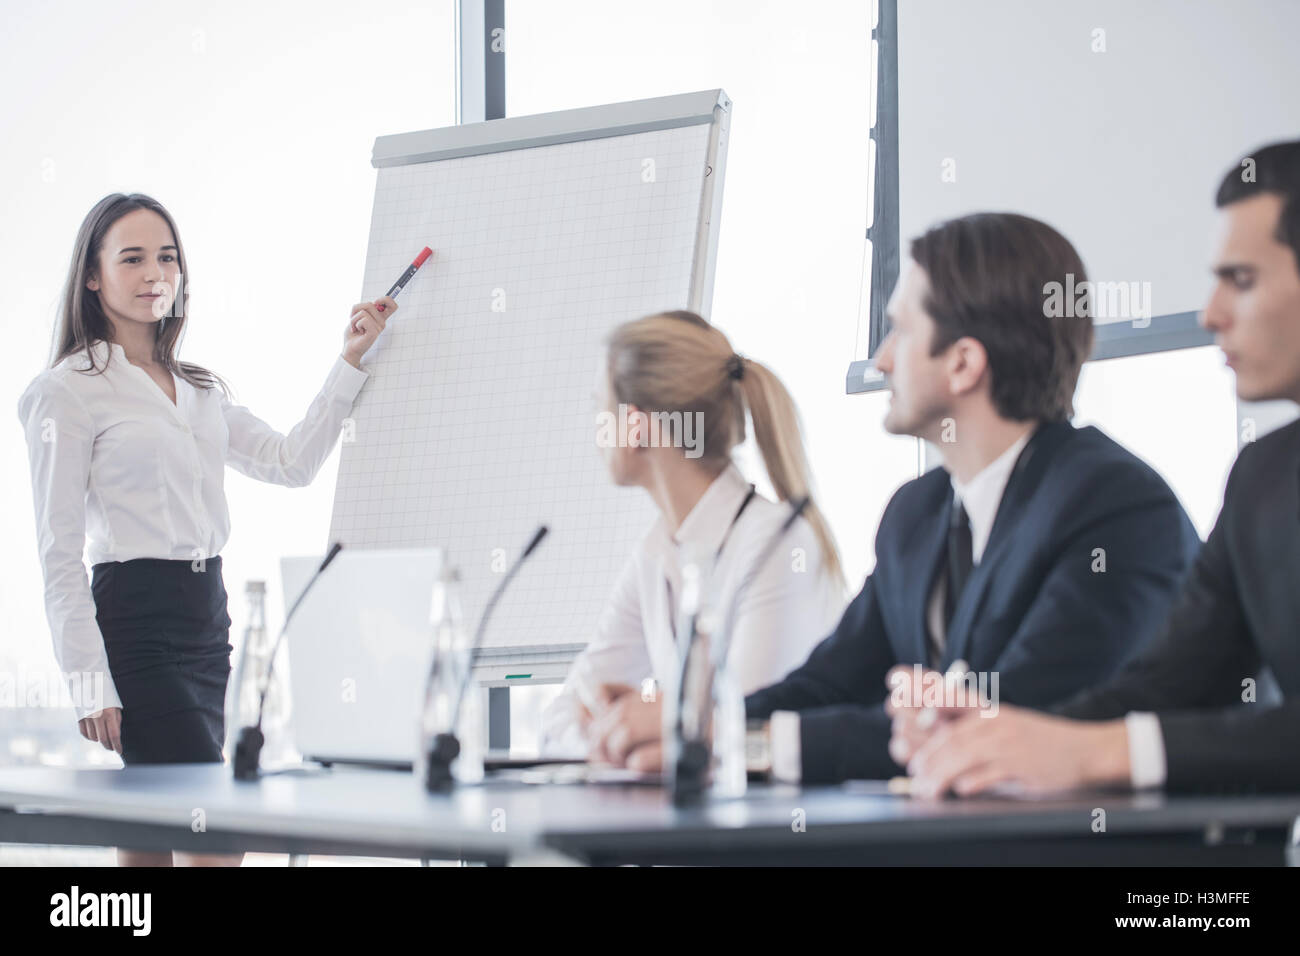 Business woman speaking at presentation and pointing to white board Stock Photo